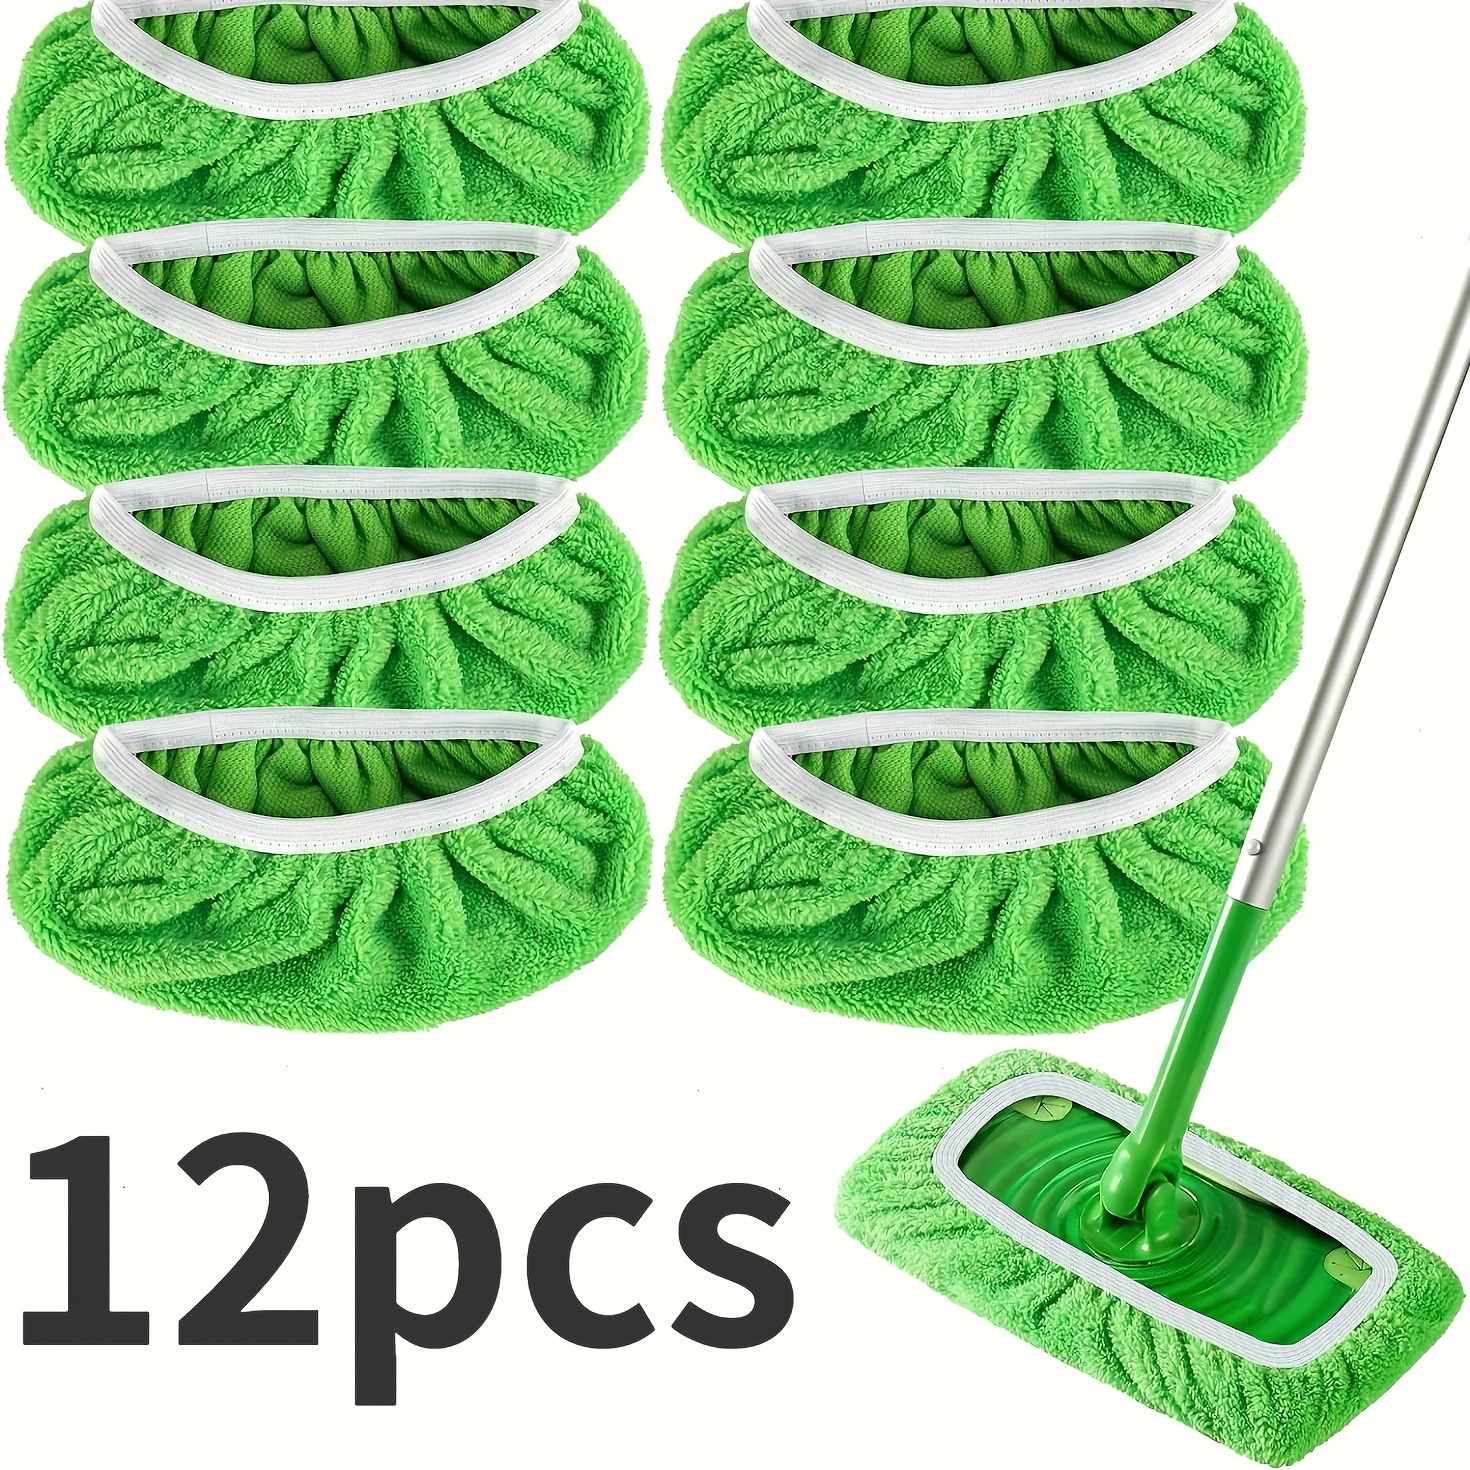 

12pcs Compatible Microfiber Mop Pads, Reusable And Washable Dry & Wet Cleaning Refills With Strong Elastic, Plastic Material